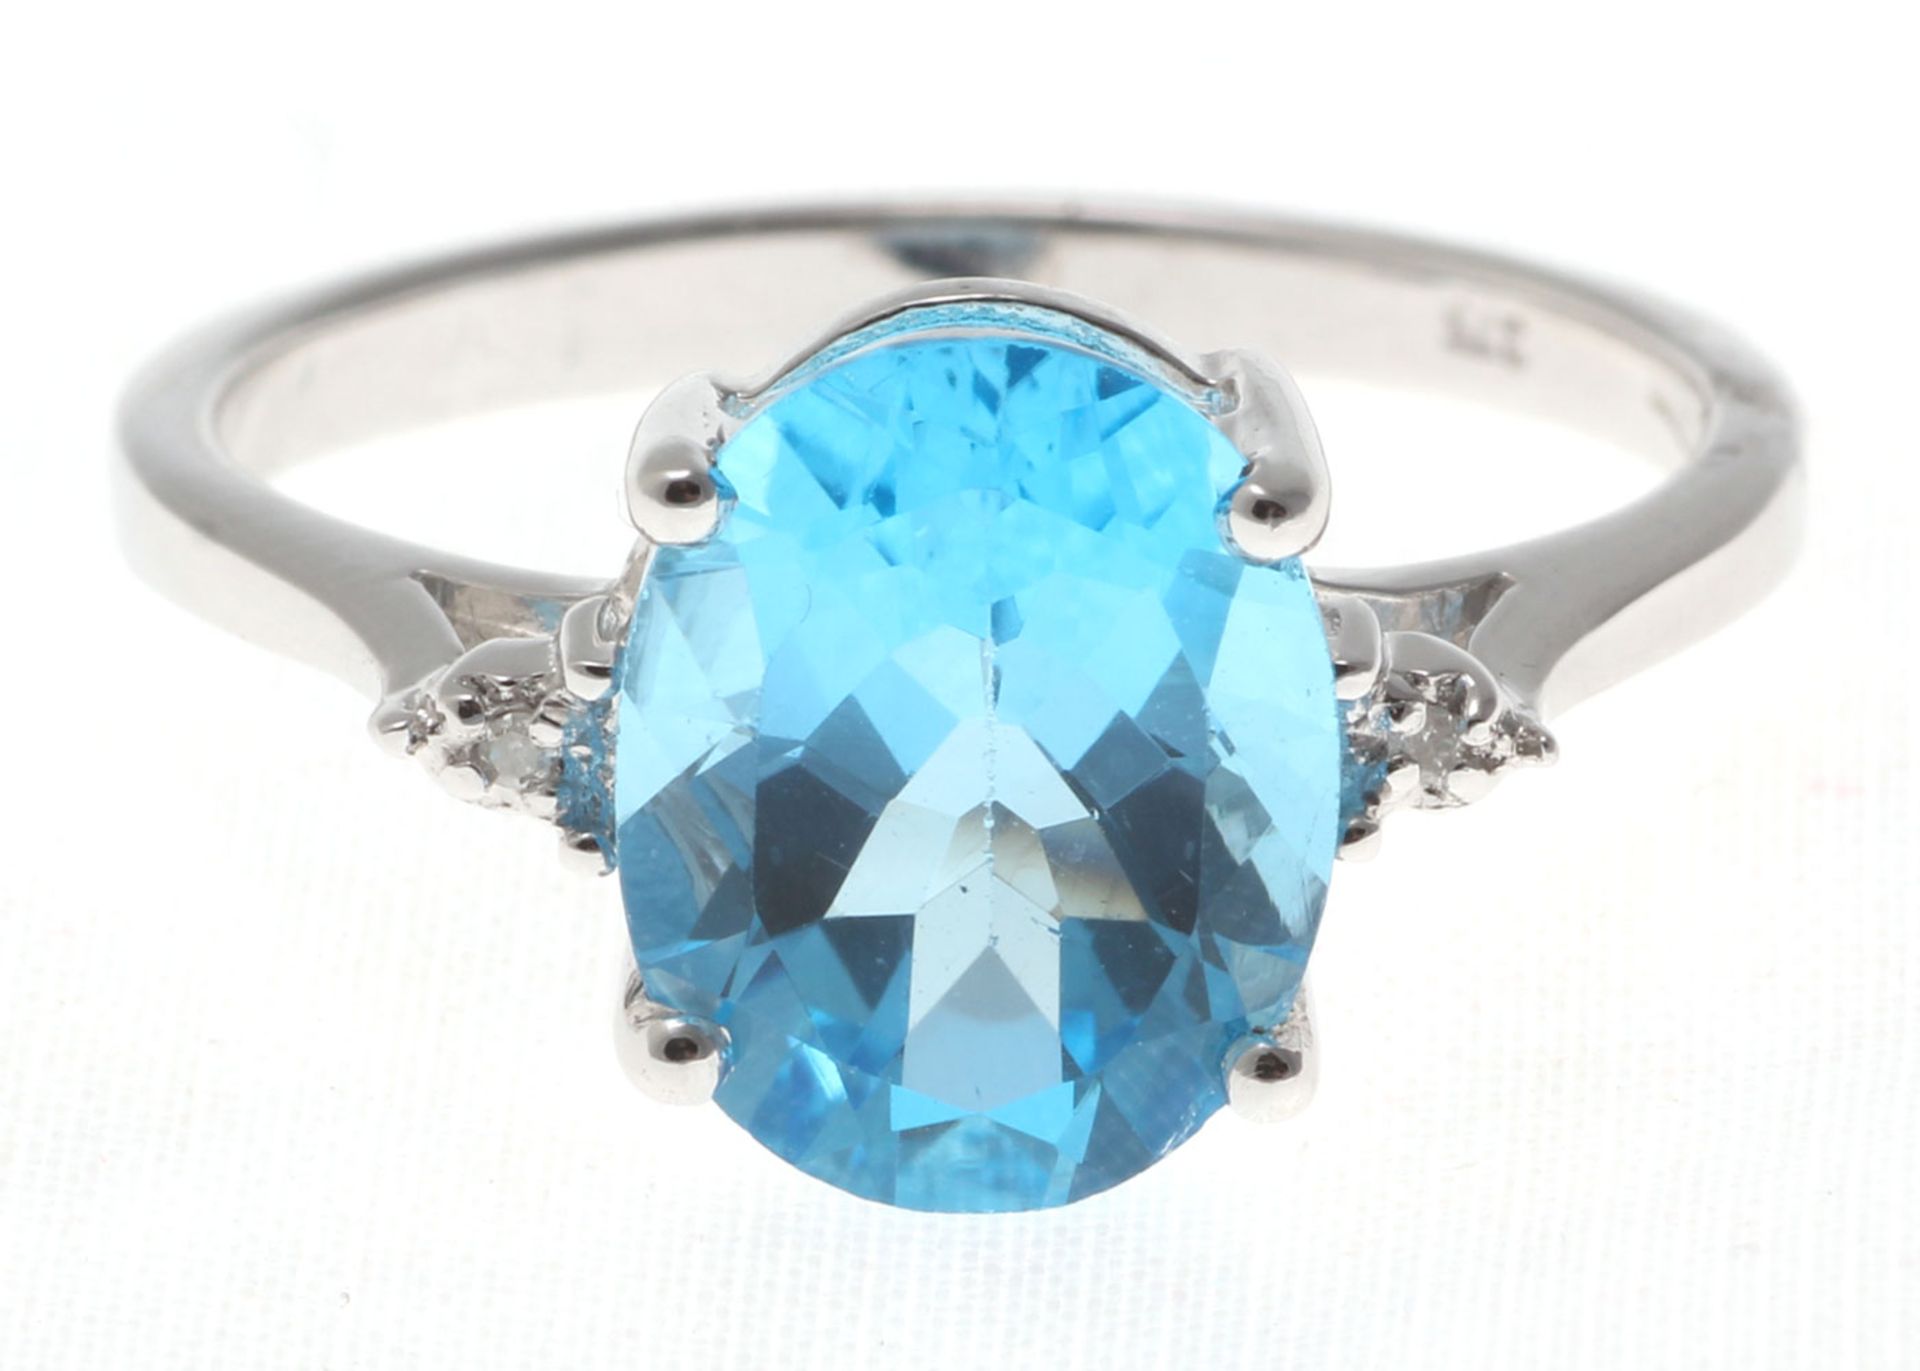 9ct White Gold Diamond And Blue Topaz Ring 0.01 Carats - Valued by GIE £1,370.00 - 9ct White Gold - Image 5 of 6